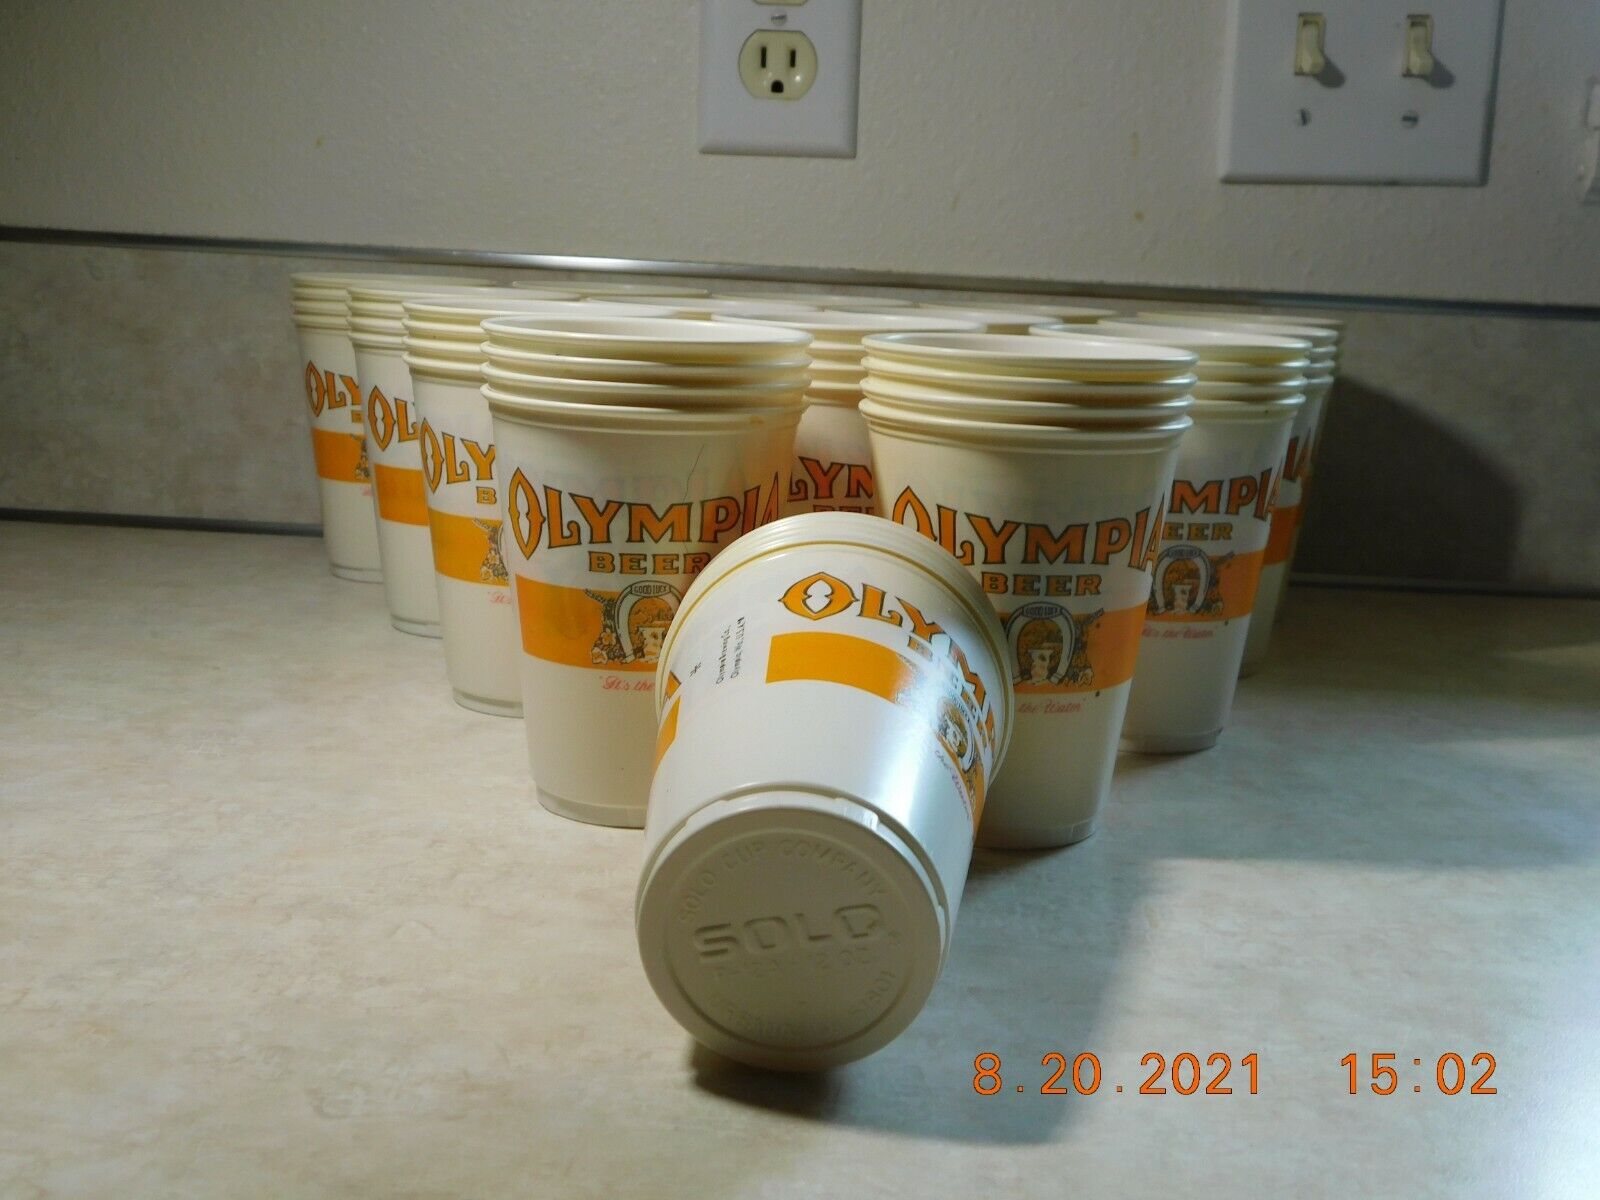 70's 80's OLYMPIA BEER Keg "It's the Water" Cups 12 oz SOLO NEW Unused  Без бренда - фотография #7